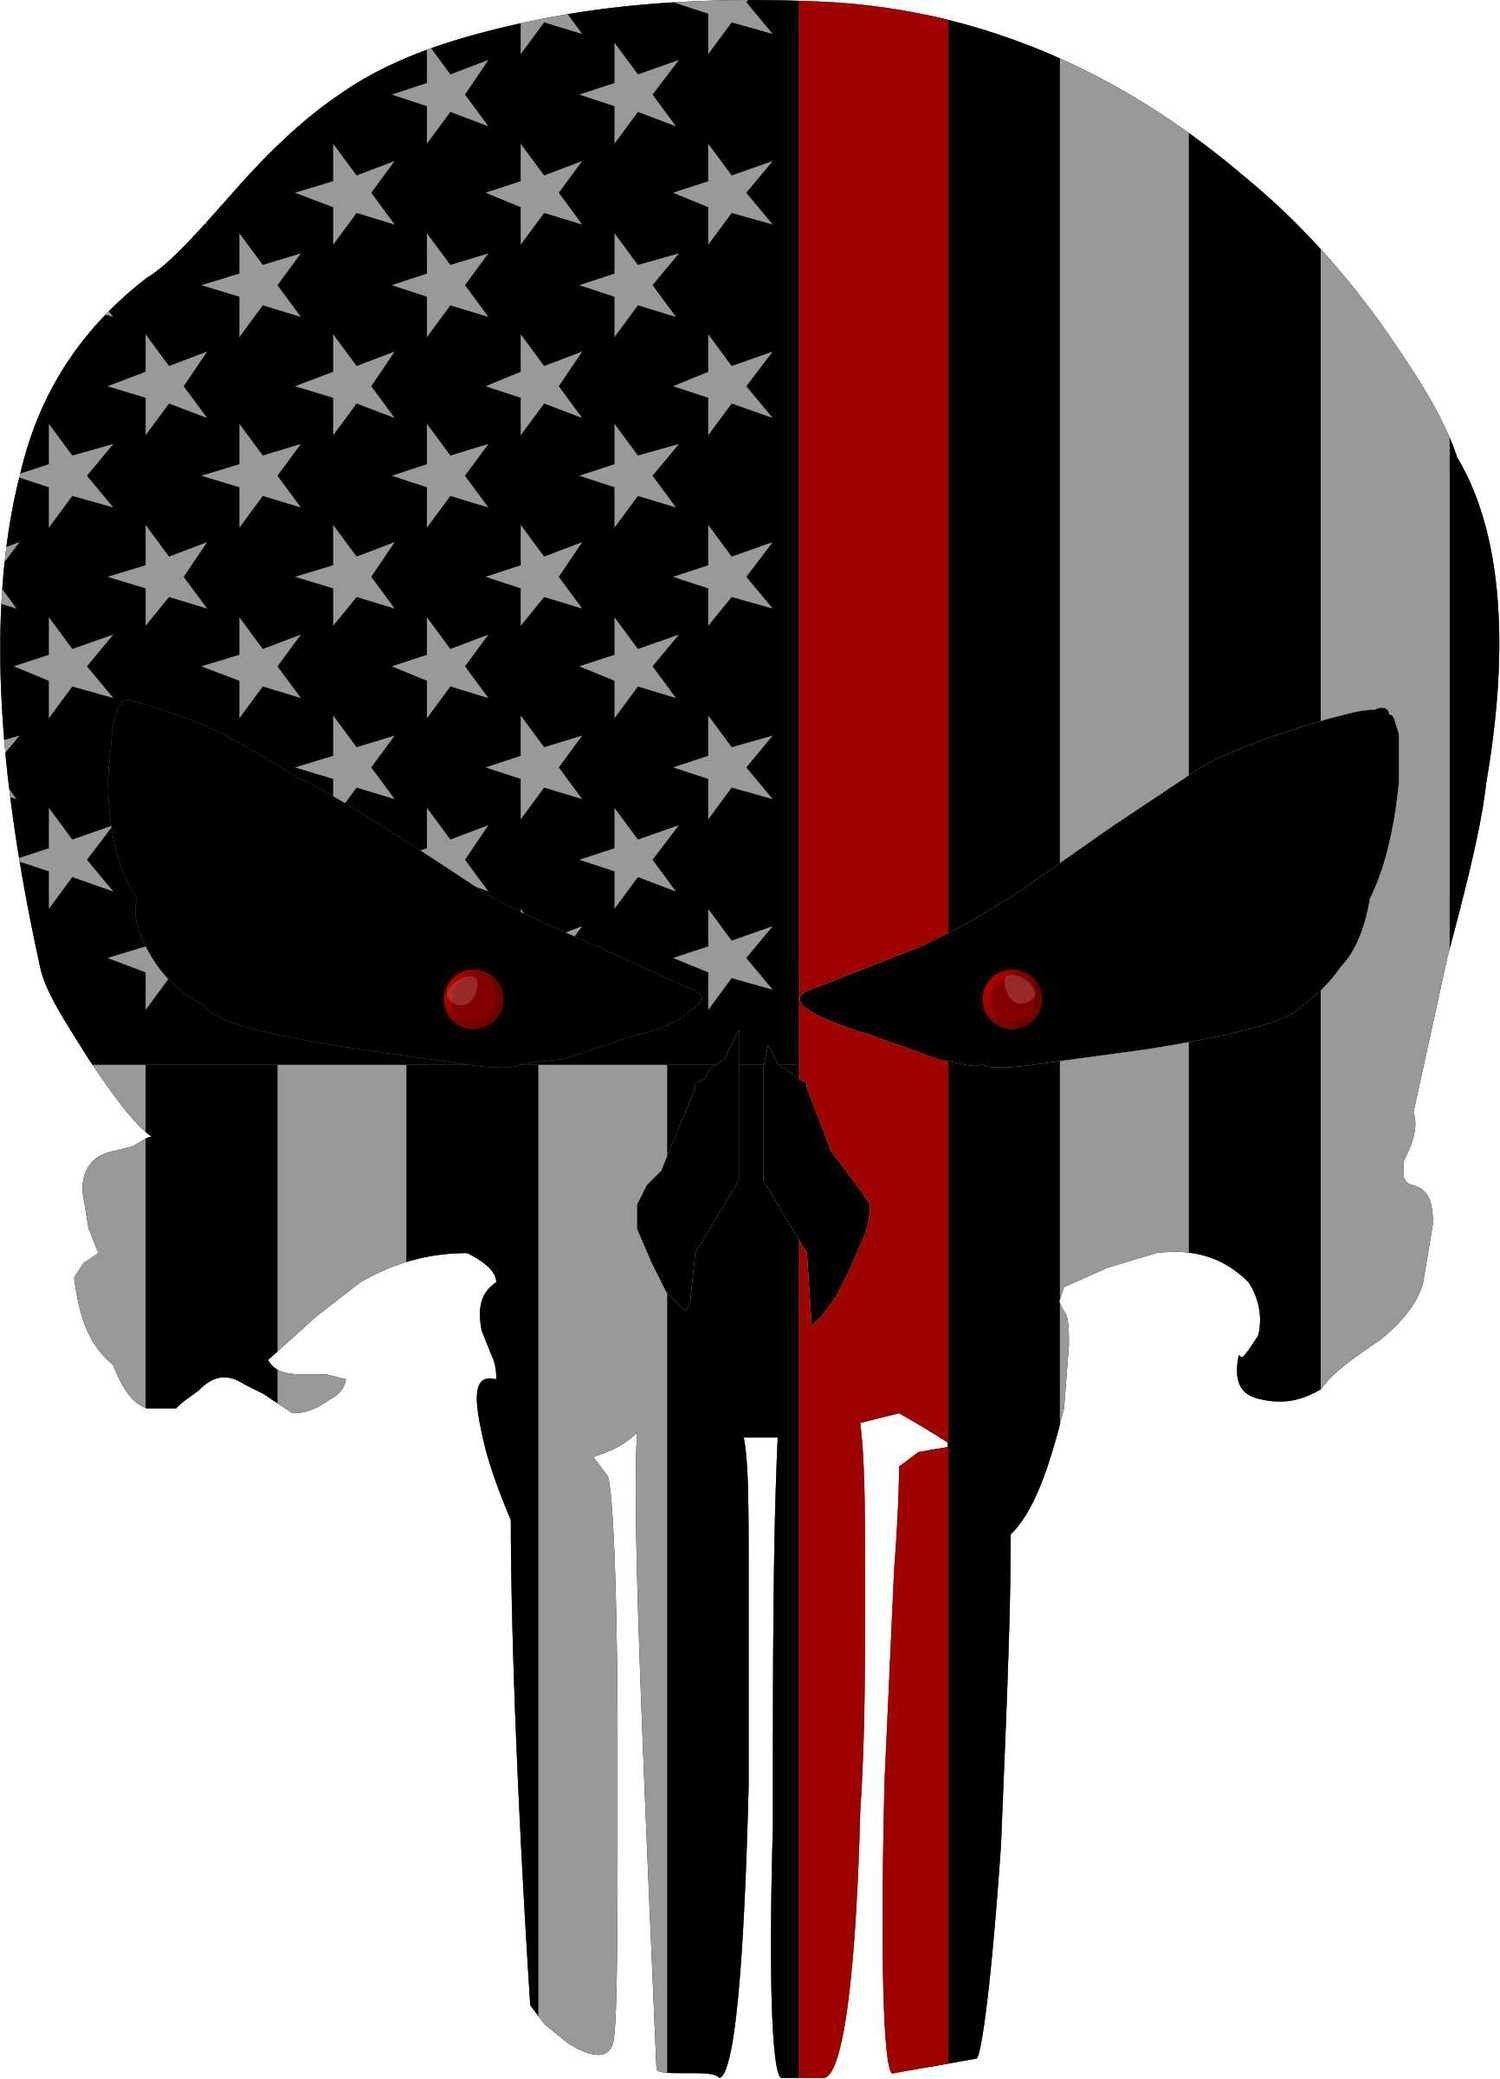 Download American Flag Punisher Wallpapers - Top Free American Flag ...